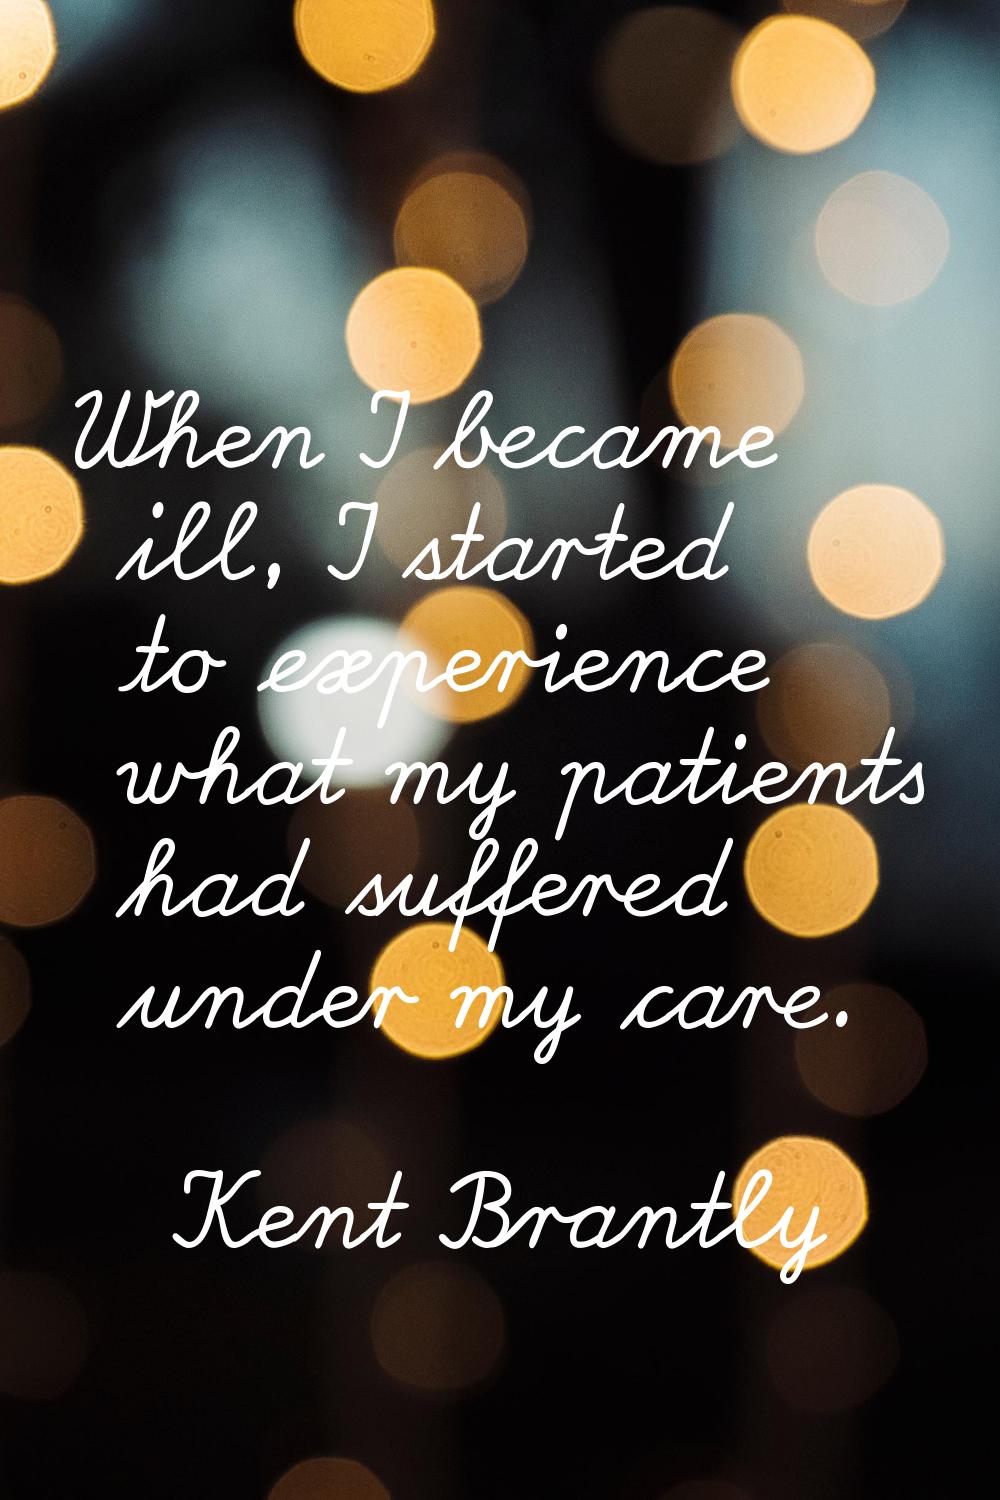 When I became ill, I started to experience what my patients had suffered under my care.